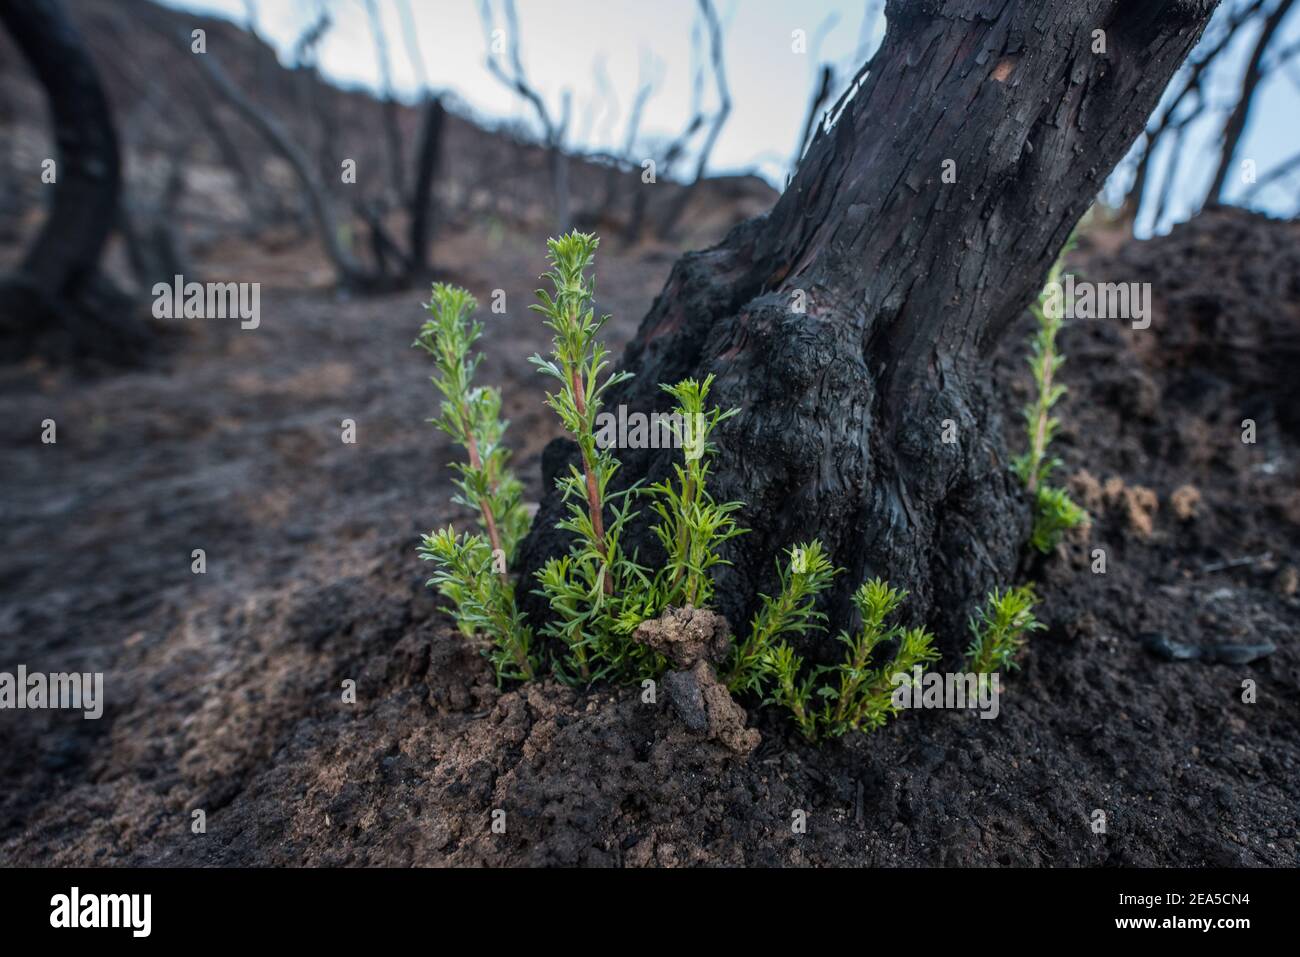 Chamise (Adenostoma fasciculatum) sprouts back after sever wildfire damage in California, one of the 1st pioneer plant species to begin recovery. Stock Photo